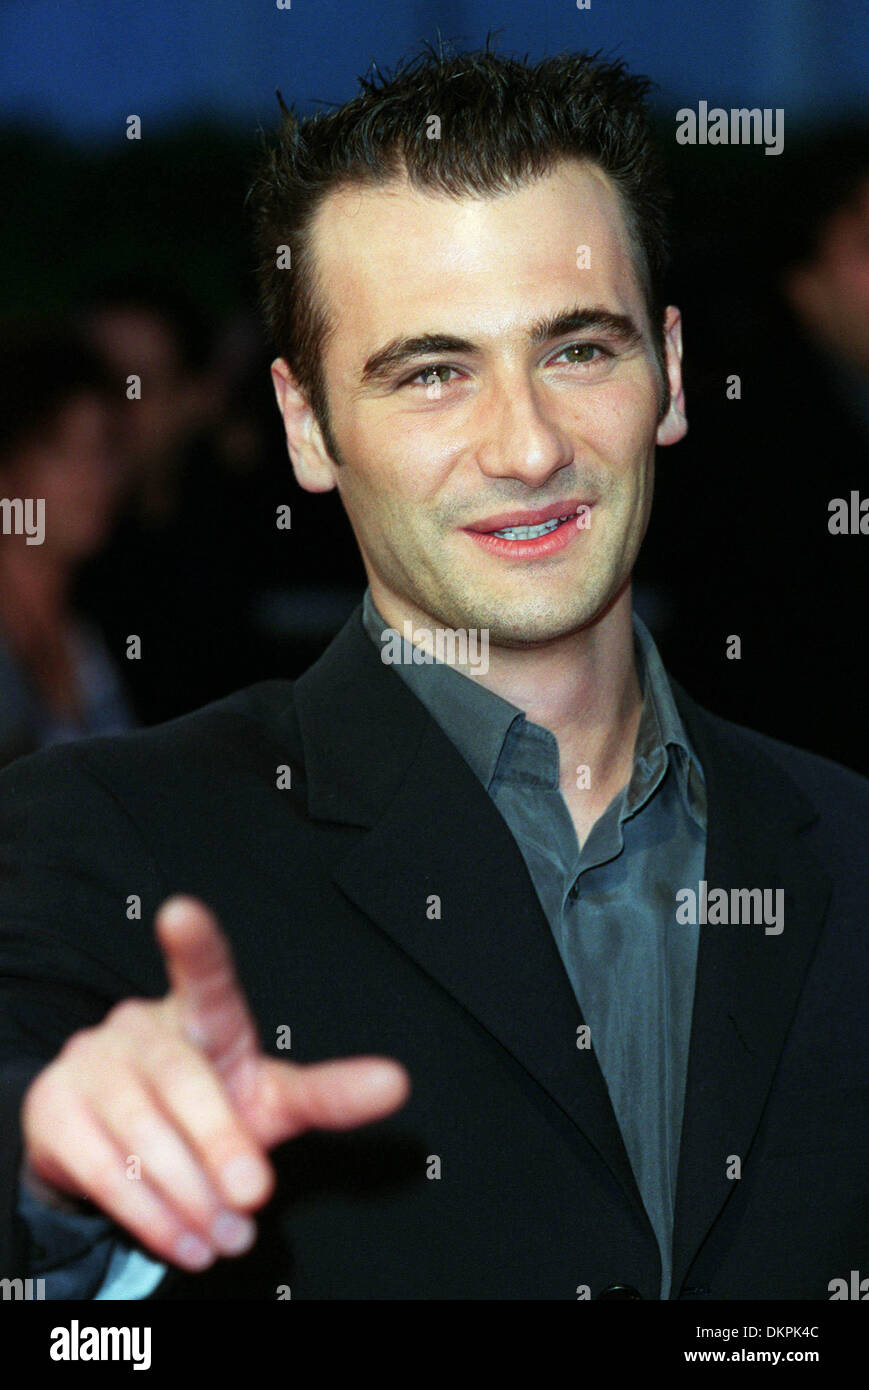 ROBERT LETIC.FILM DIRECTOR.DEAUVILLE, FRANCE.03/09/2001.BL99D10 Stock Photo